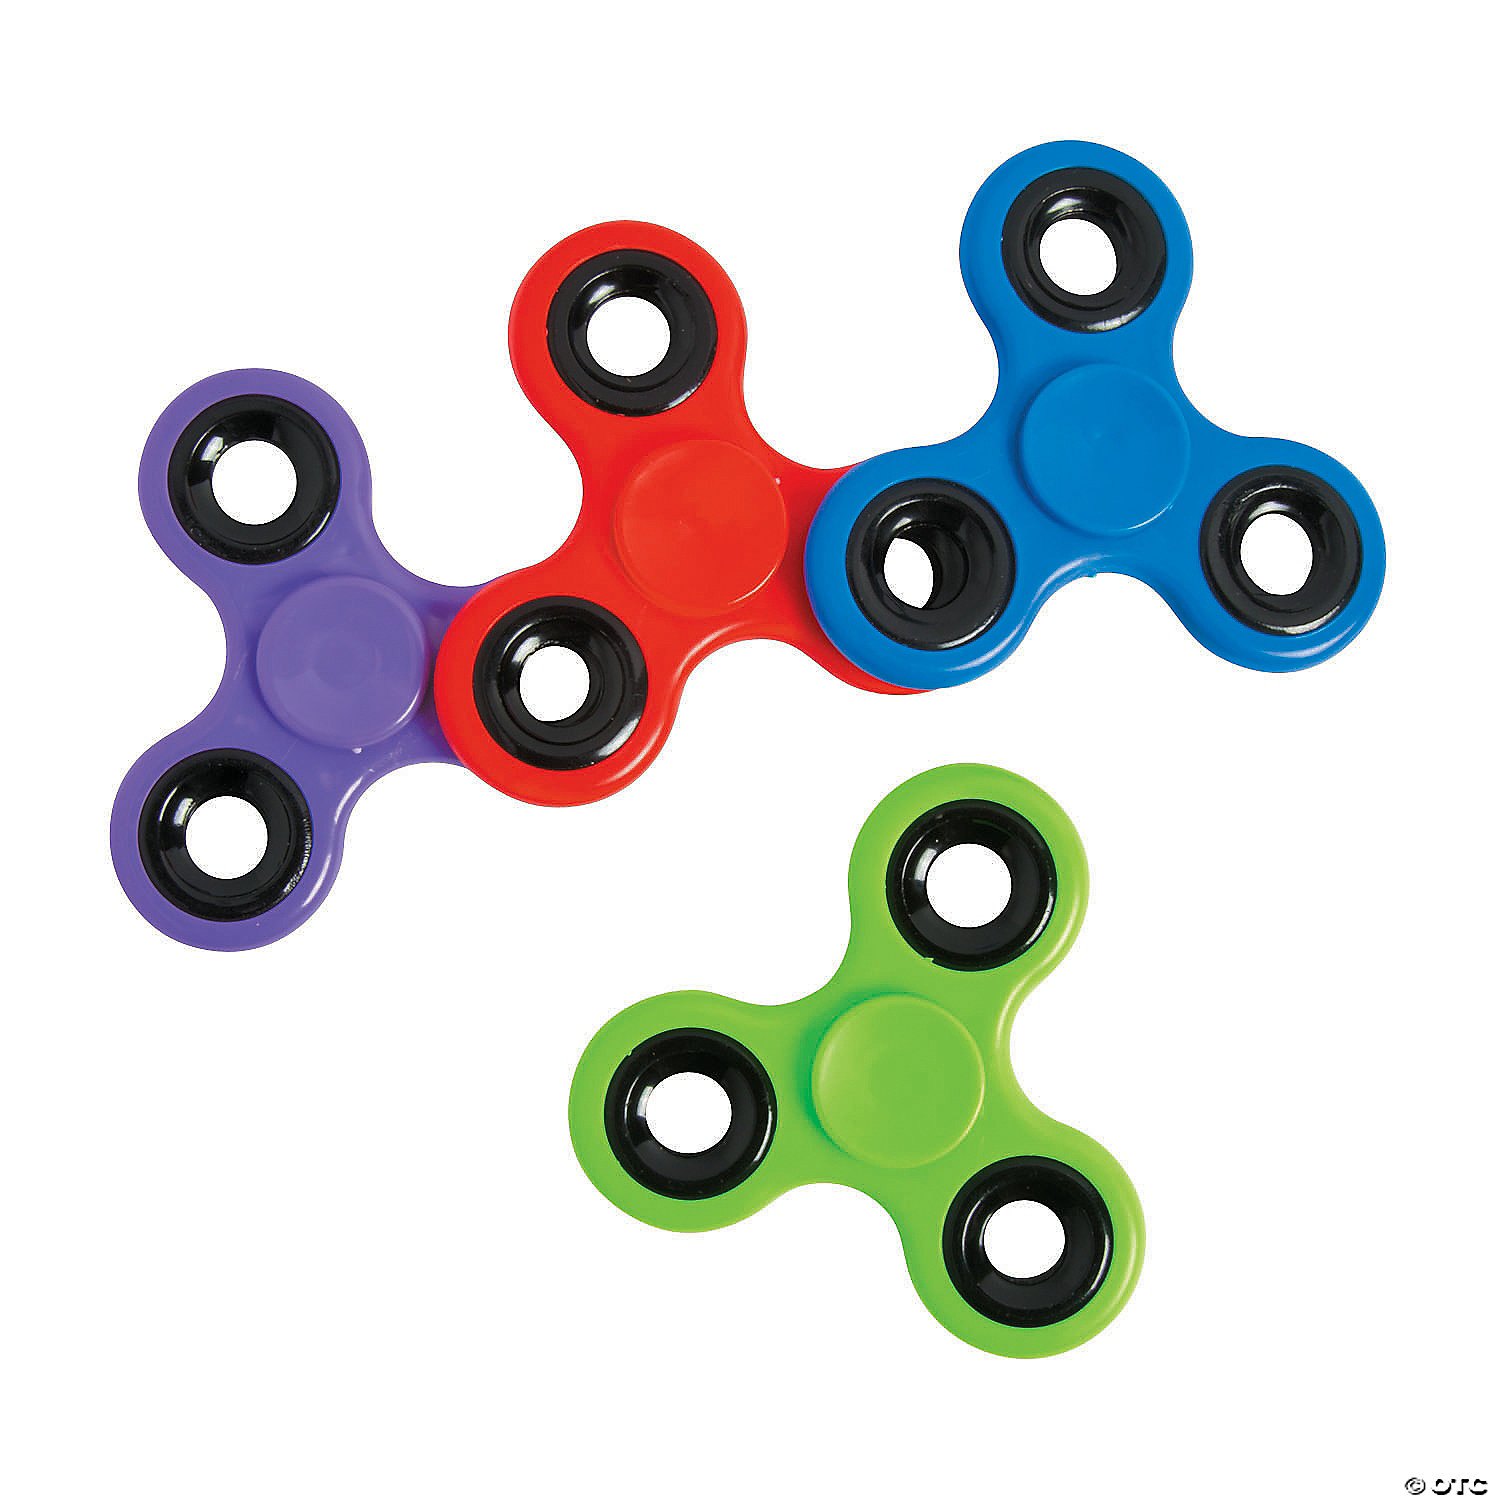 US SELL FIDGET SPINNERS SET OF 2 CHOICE OF 4 SOLID COLORS  HELPS WITH ATTENTION 